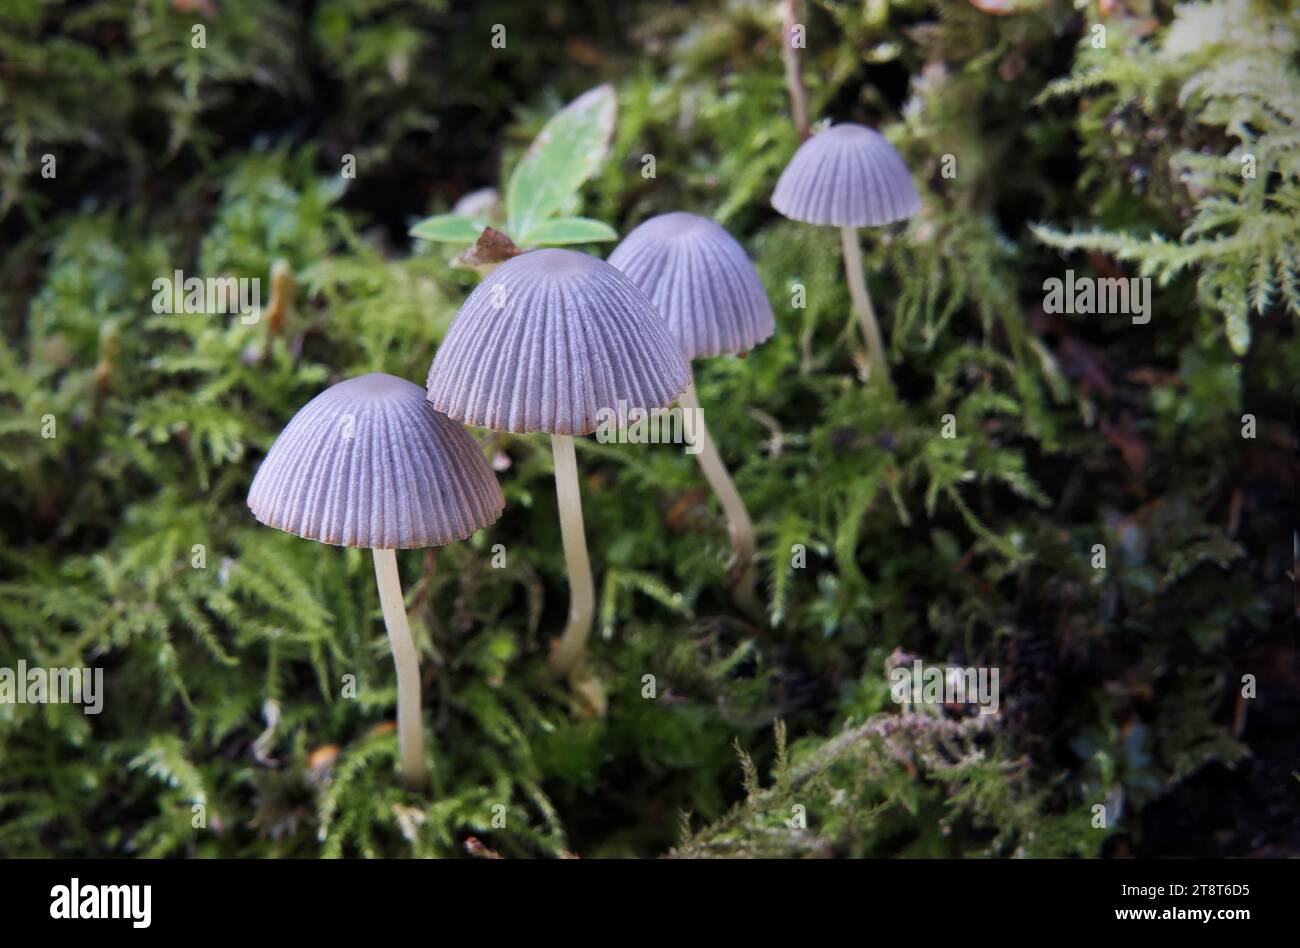 Mycena, Mycena is a large genus of small saprotrophic mushrooms that are rarely more than a few centimeters in width. They are characterized by a white spore print, a small conical or bell-shaped cap, and a thin fragile stem. Most are gray or brown, but a few species have brighter colors Stock Photo